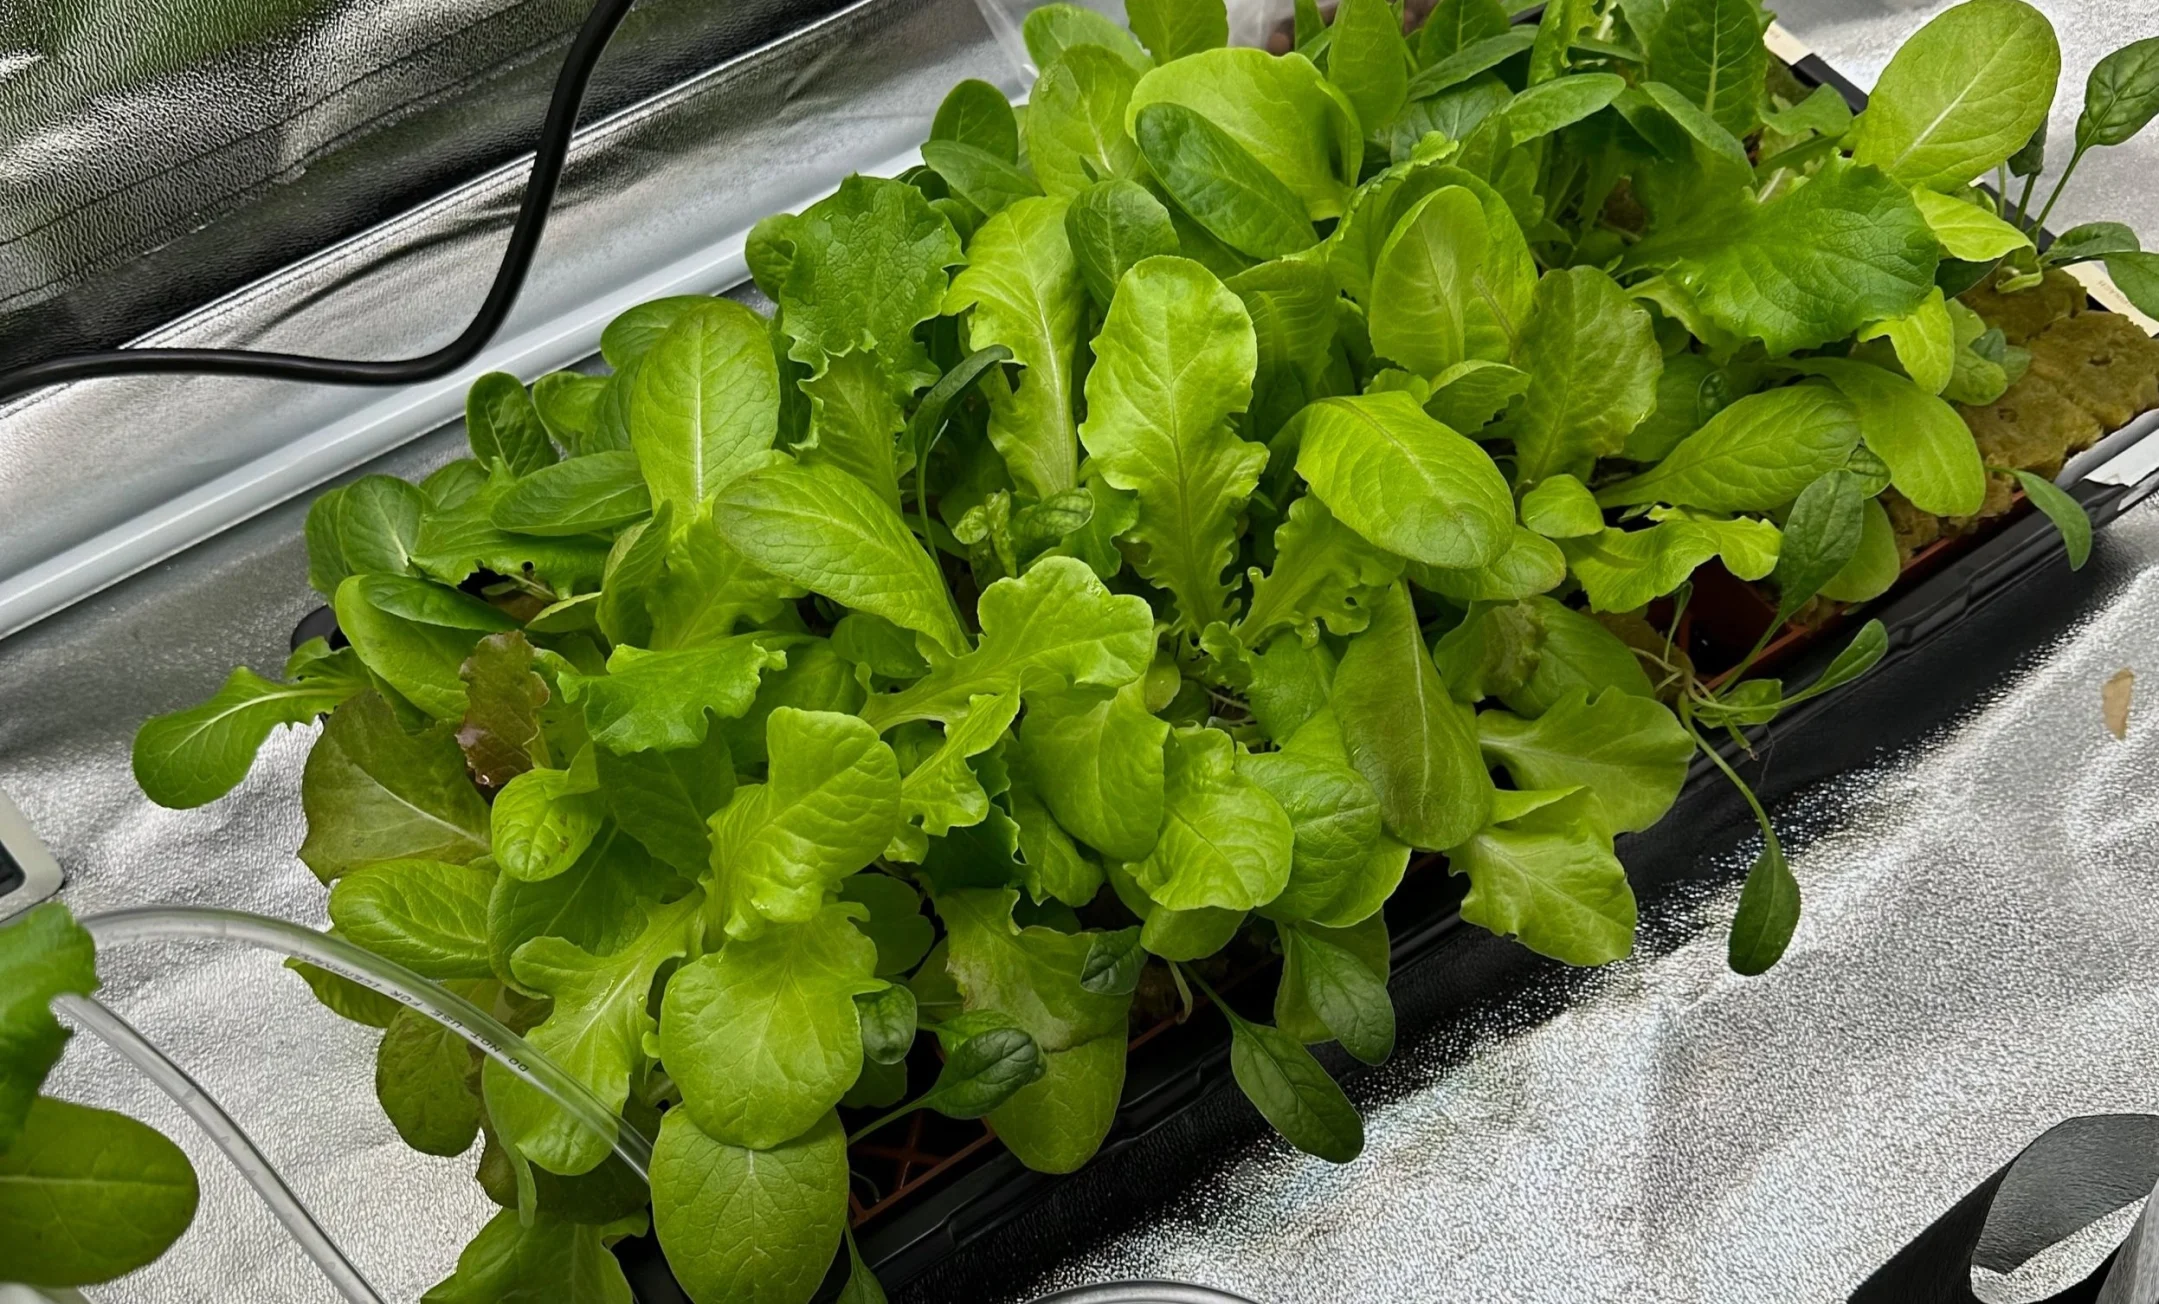 Lettuce planted in hydroponic system